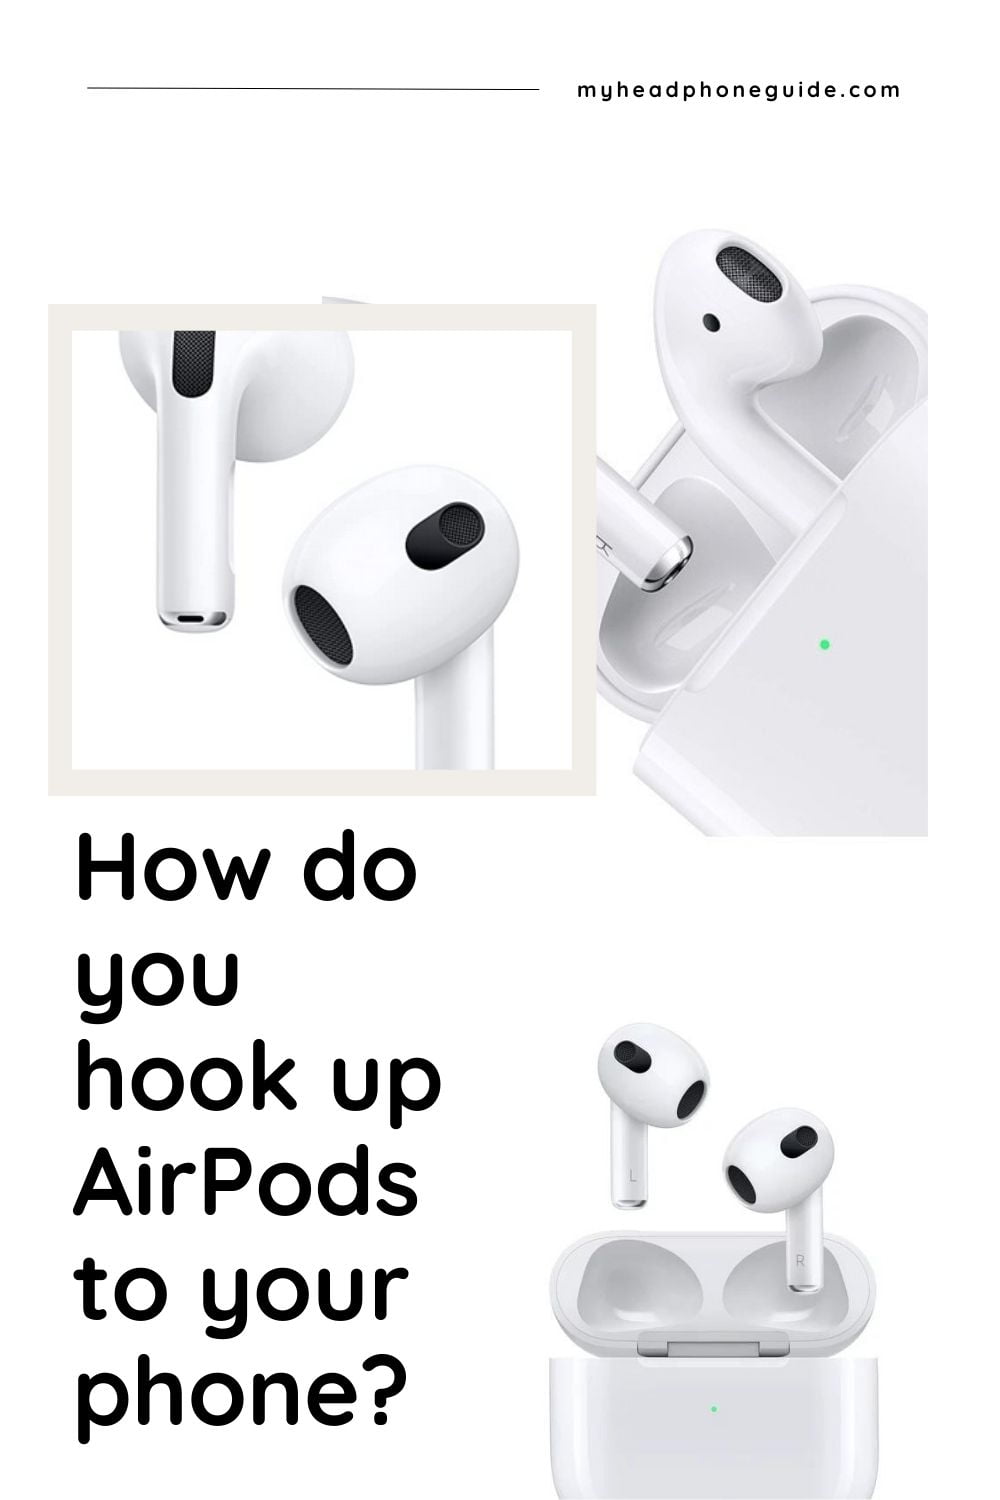 How do you hook up AirPods to your phone?